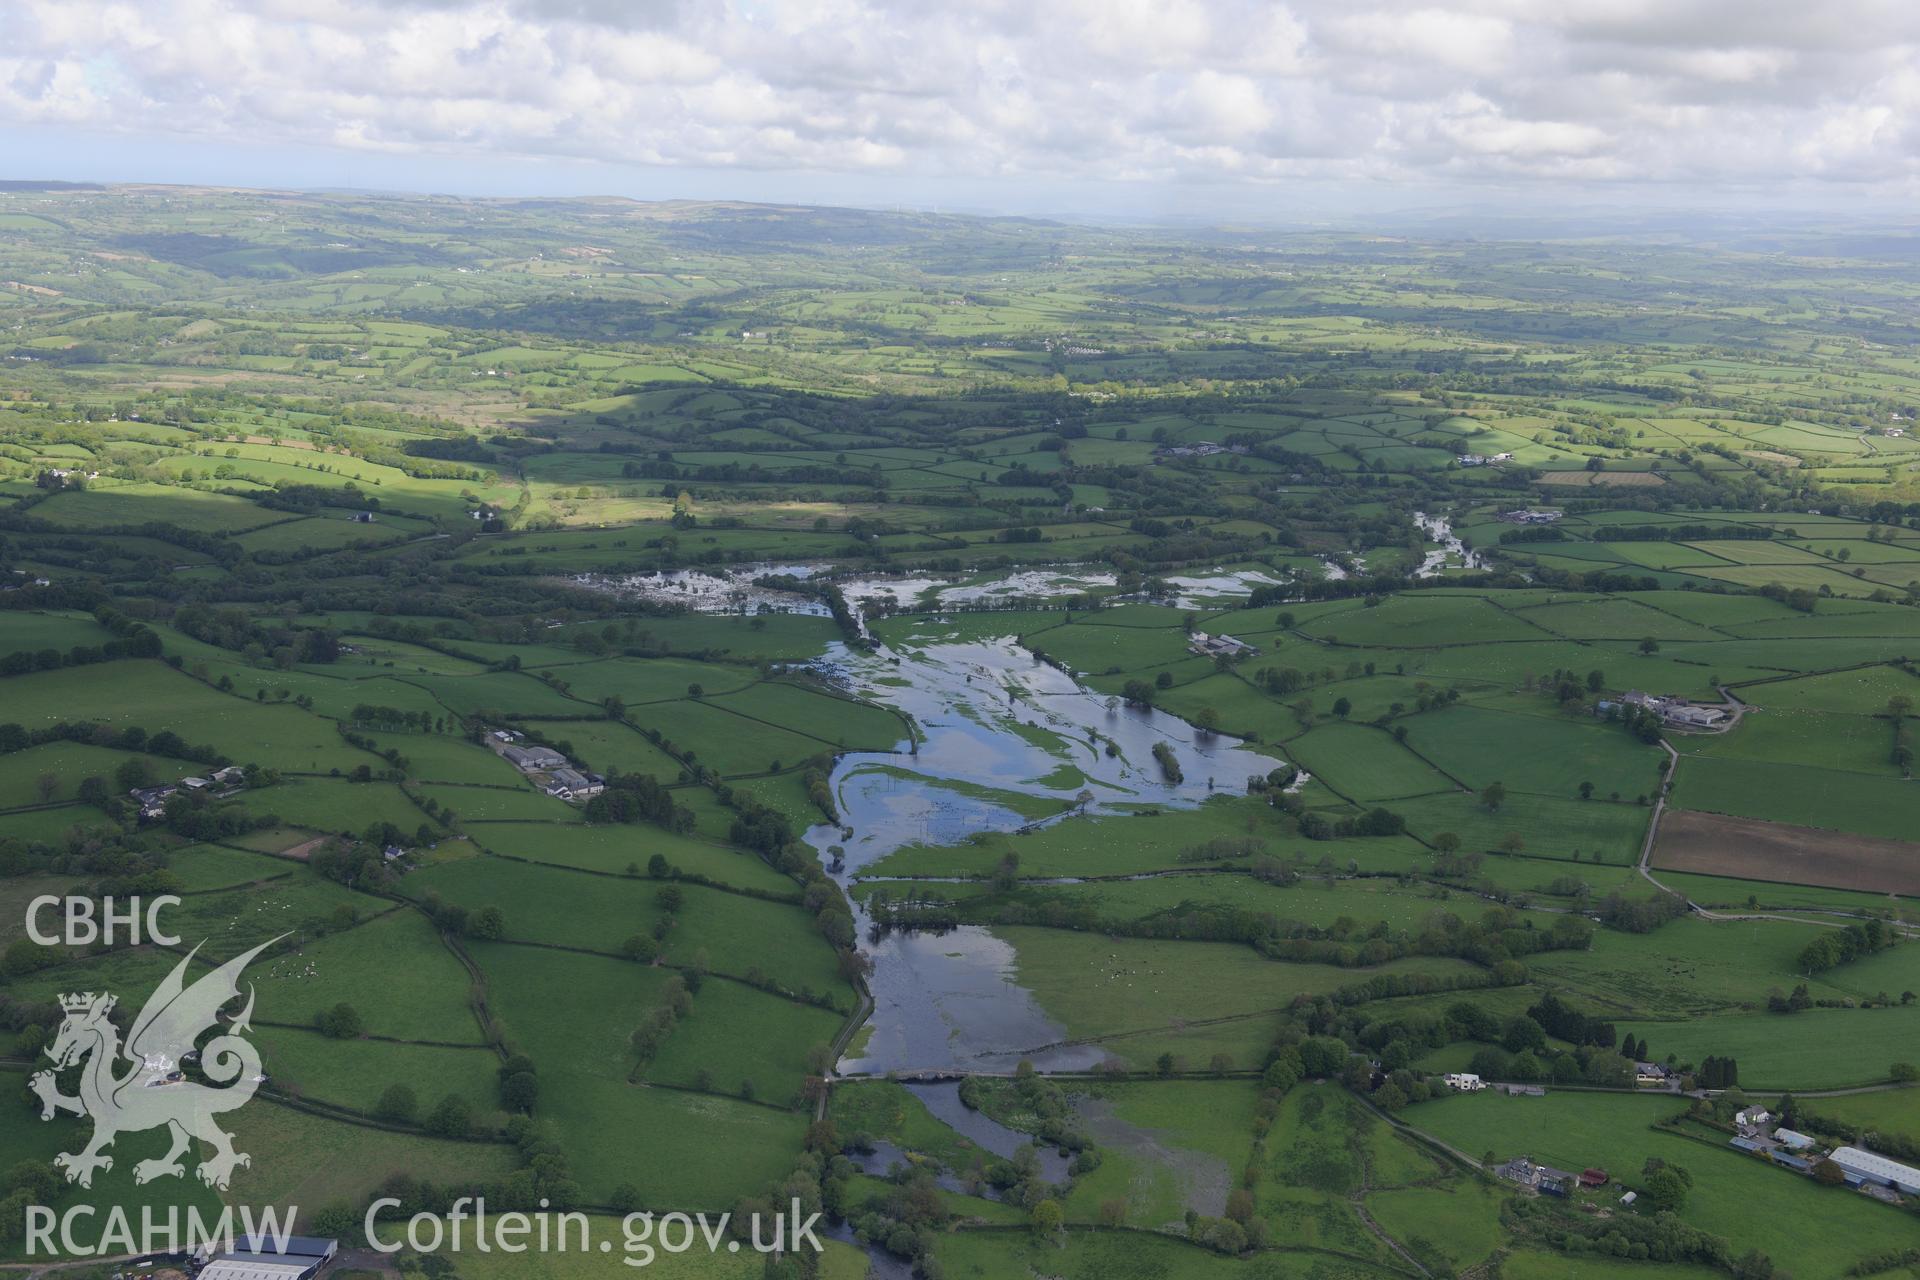 Flooding near Pont Gogoyan, Llanddewi Brefi. Oblique aerial photograph taken during the Royal Commission's programme of archaeological aerial reconnaissance by Toby Driver on 3rd June 2015.